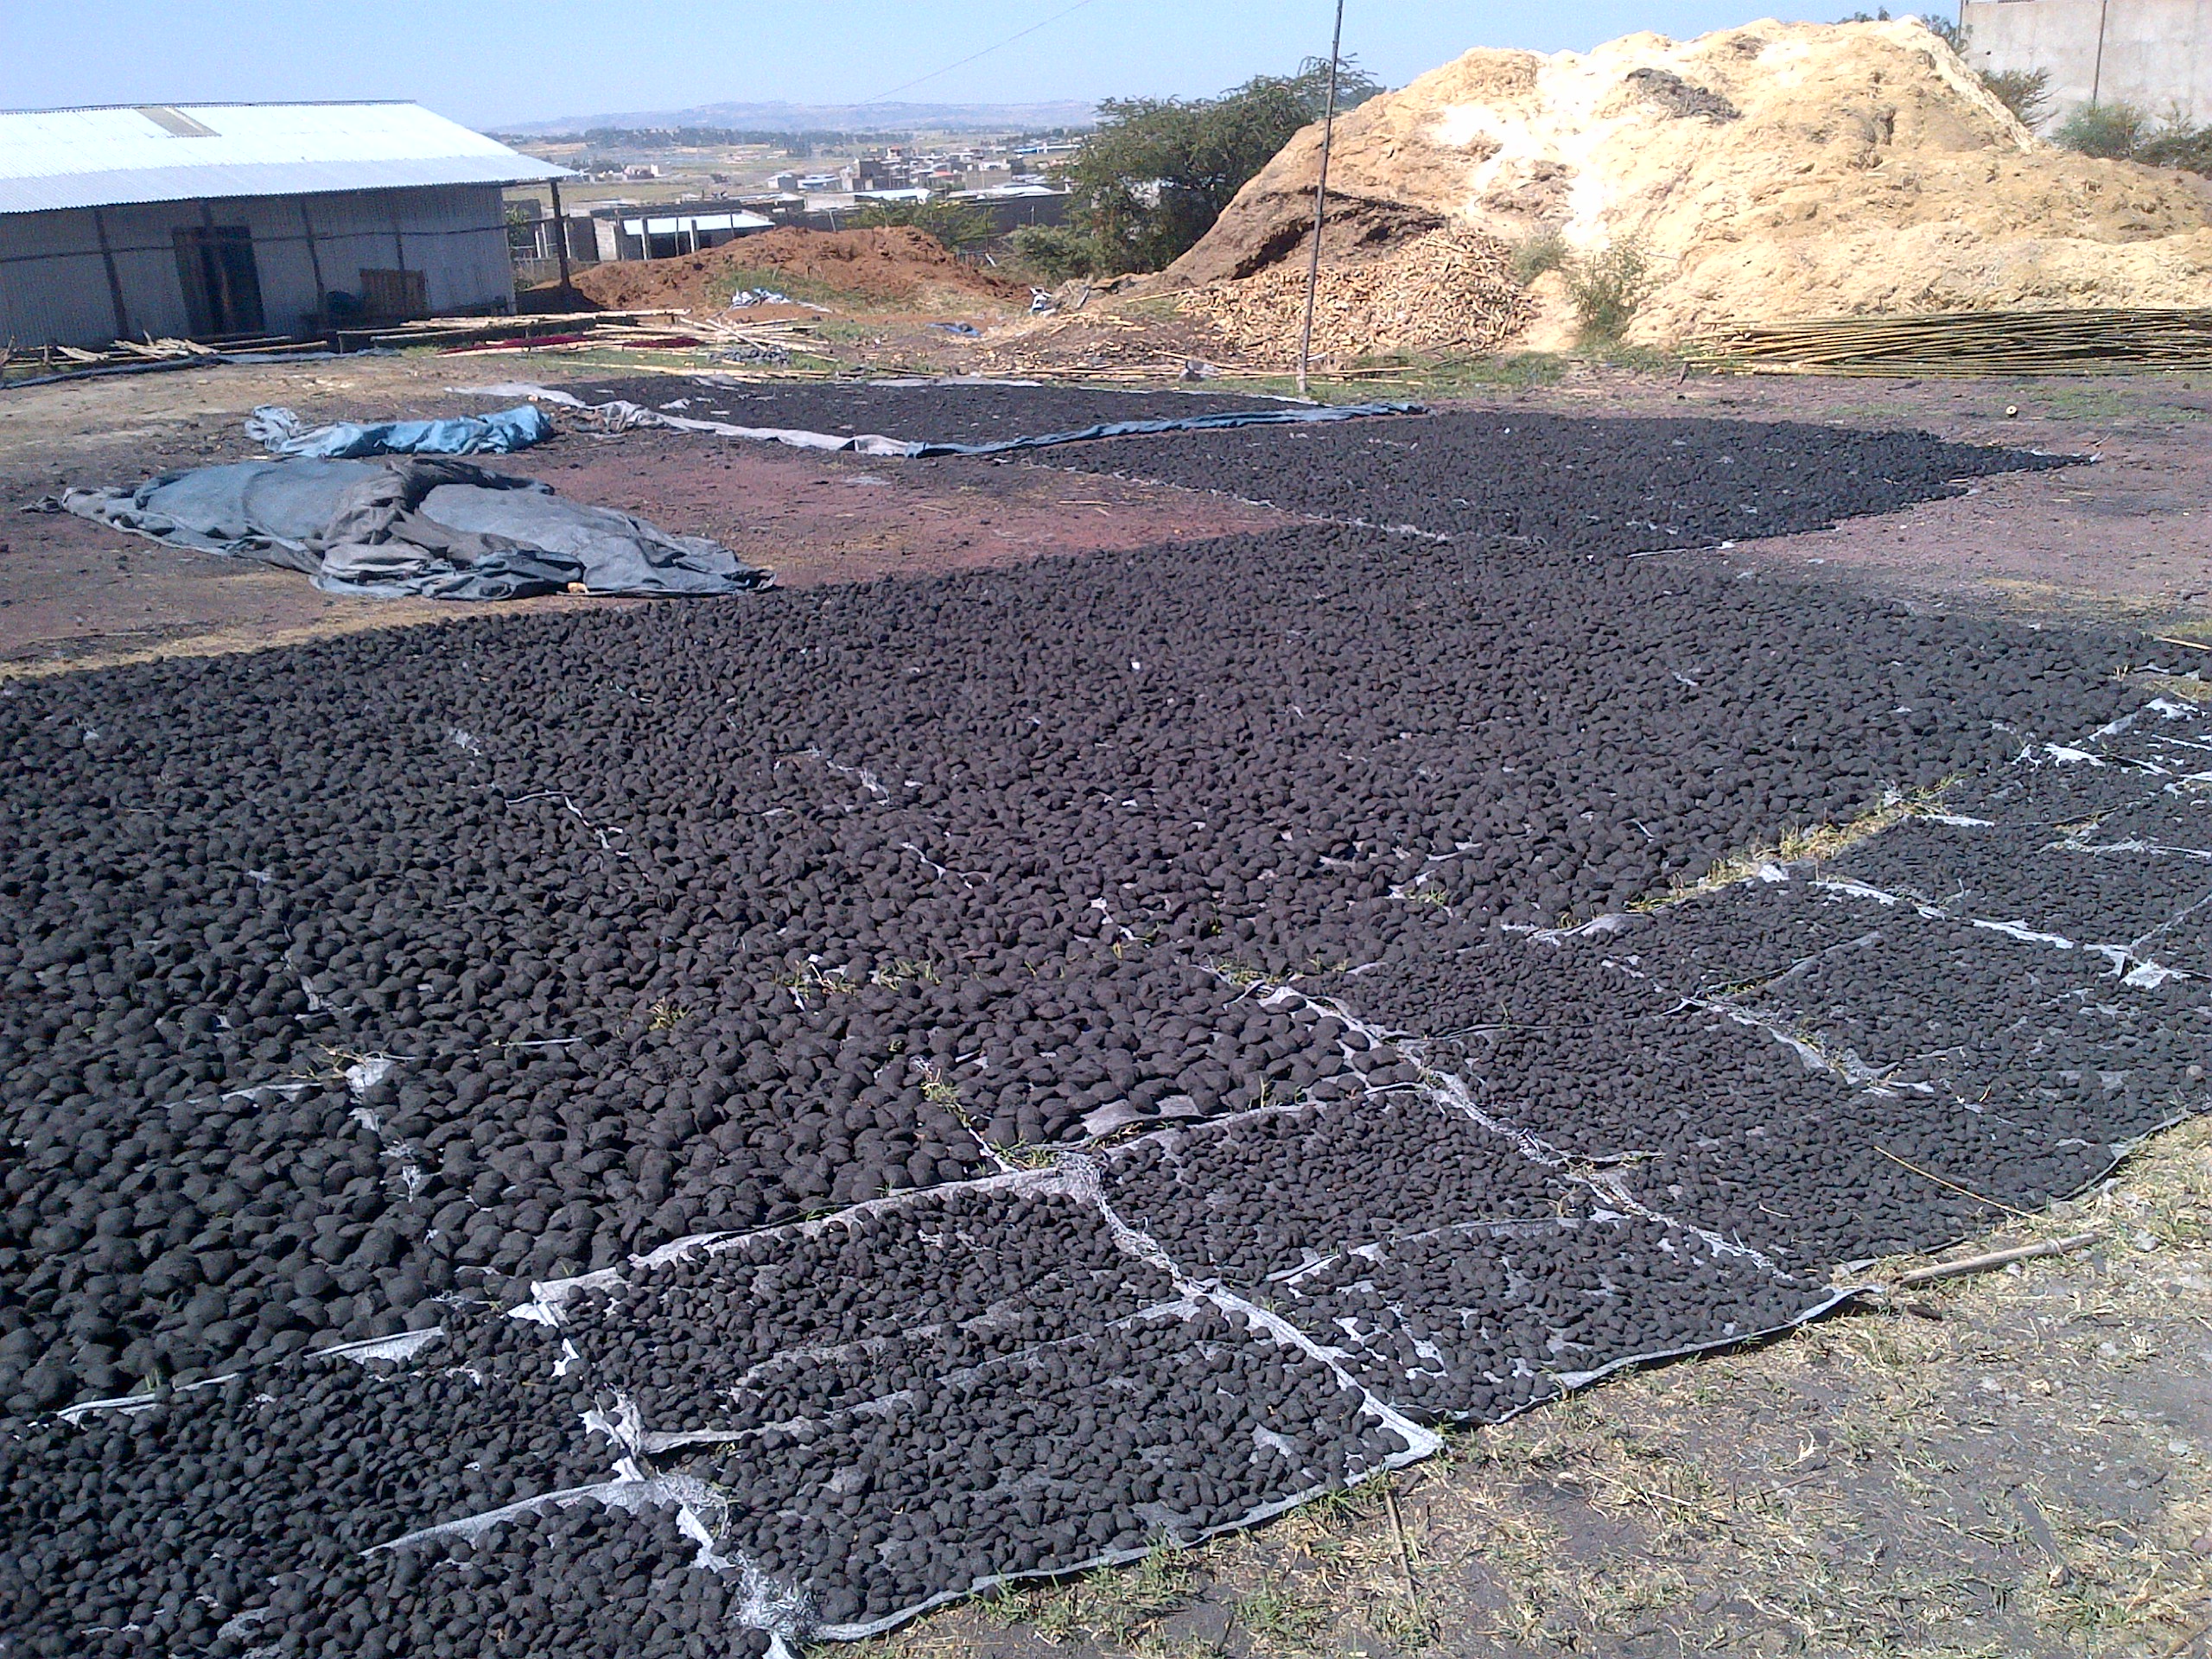 Charcoal production site in Addis Ababa, Ethiopia